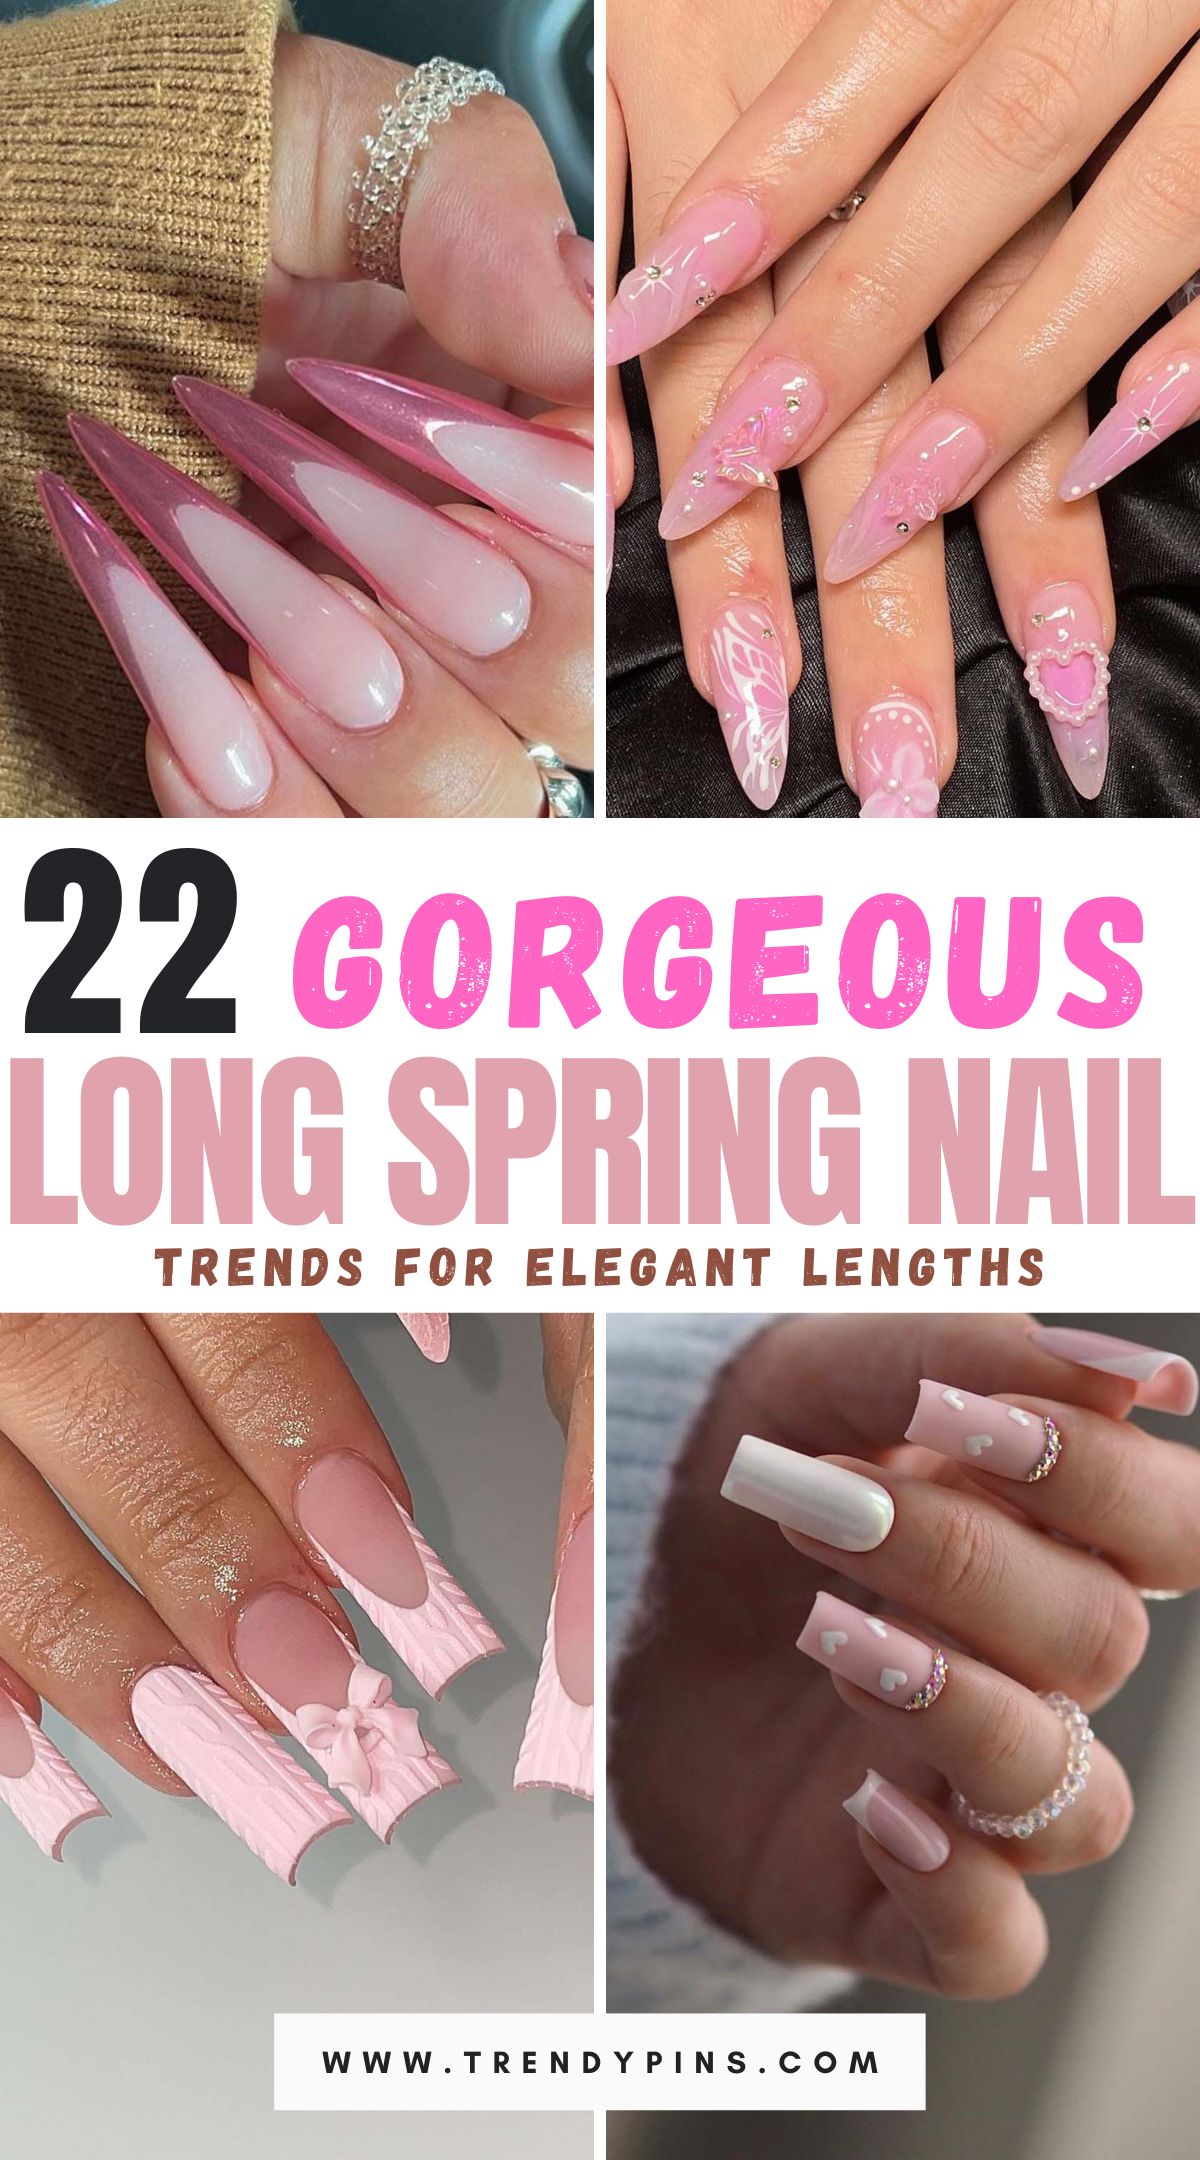 Explore the top 22 spring long nail trends to elevate your style with elegant, eye-catching designs perfect for the season.
